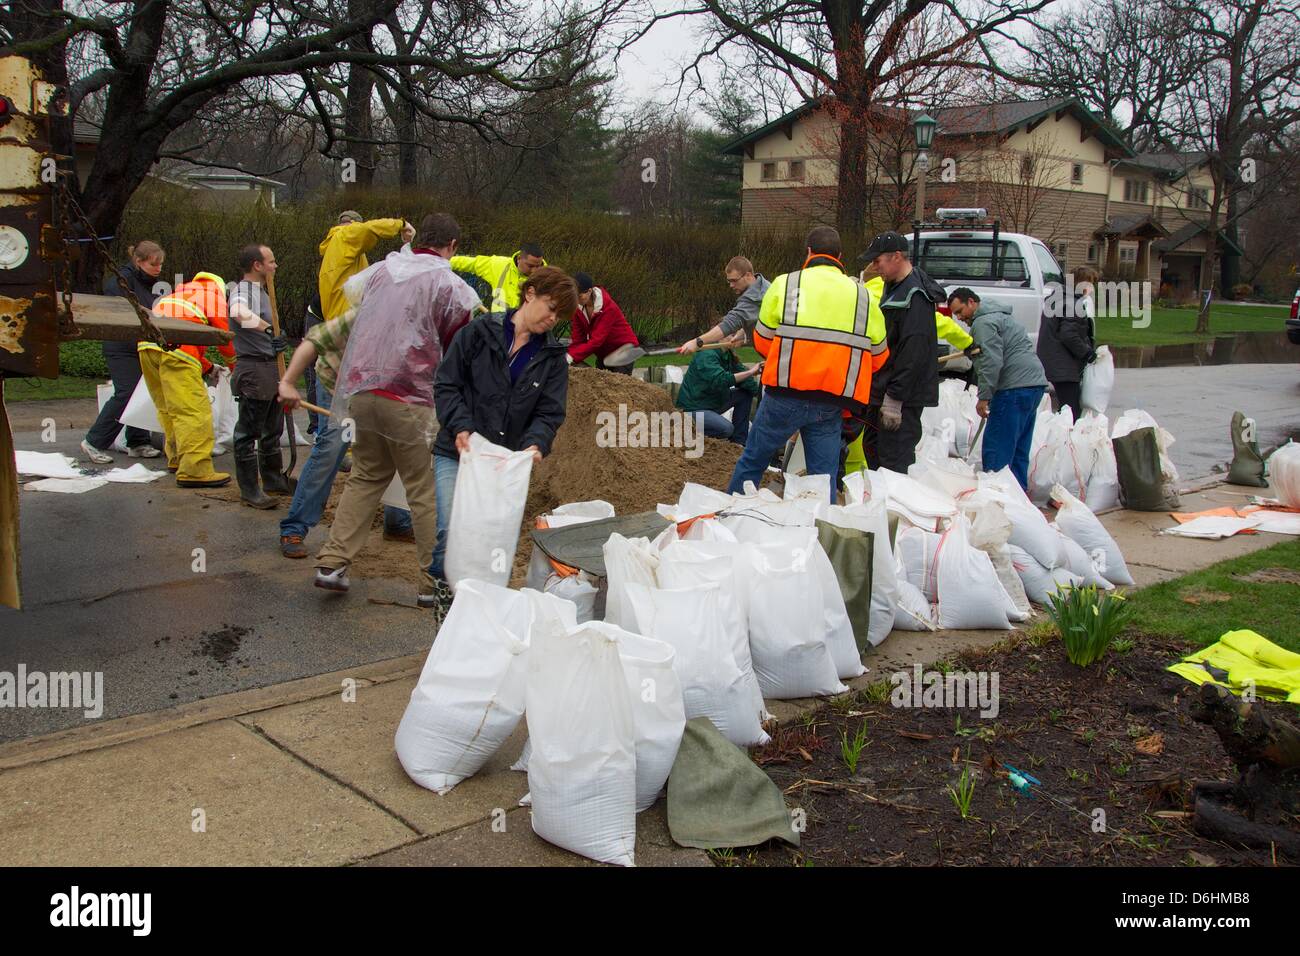 River Forest, Illinois, USA. 18th April 2013. Volunteers fill sandbags on River Oaks Drive adjacent to the Des Plaines River. The river is expected to flood to record levels due to heavy rains. Stock Photo